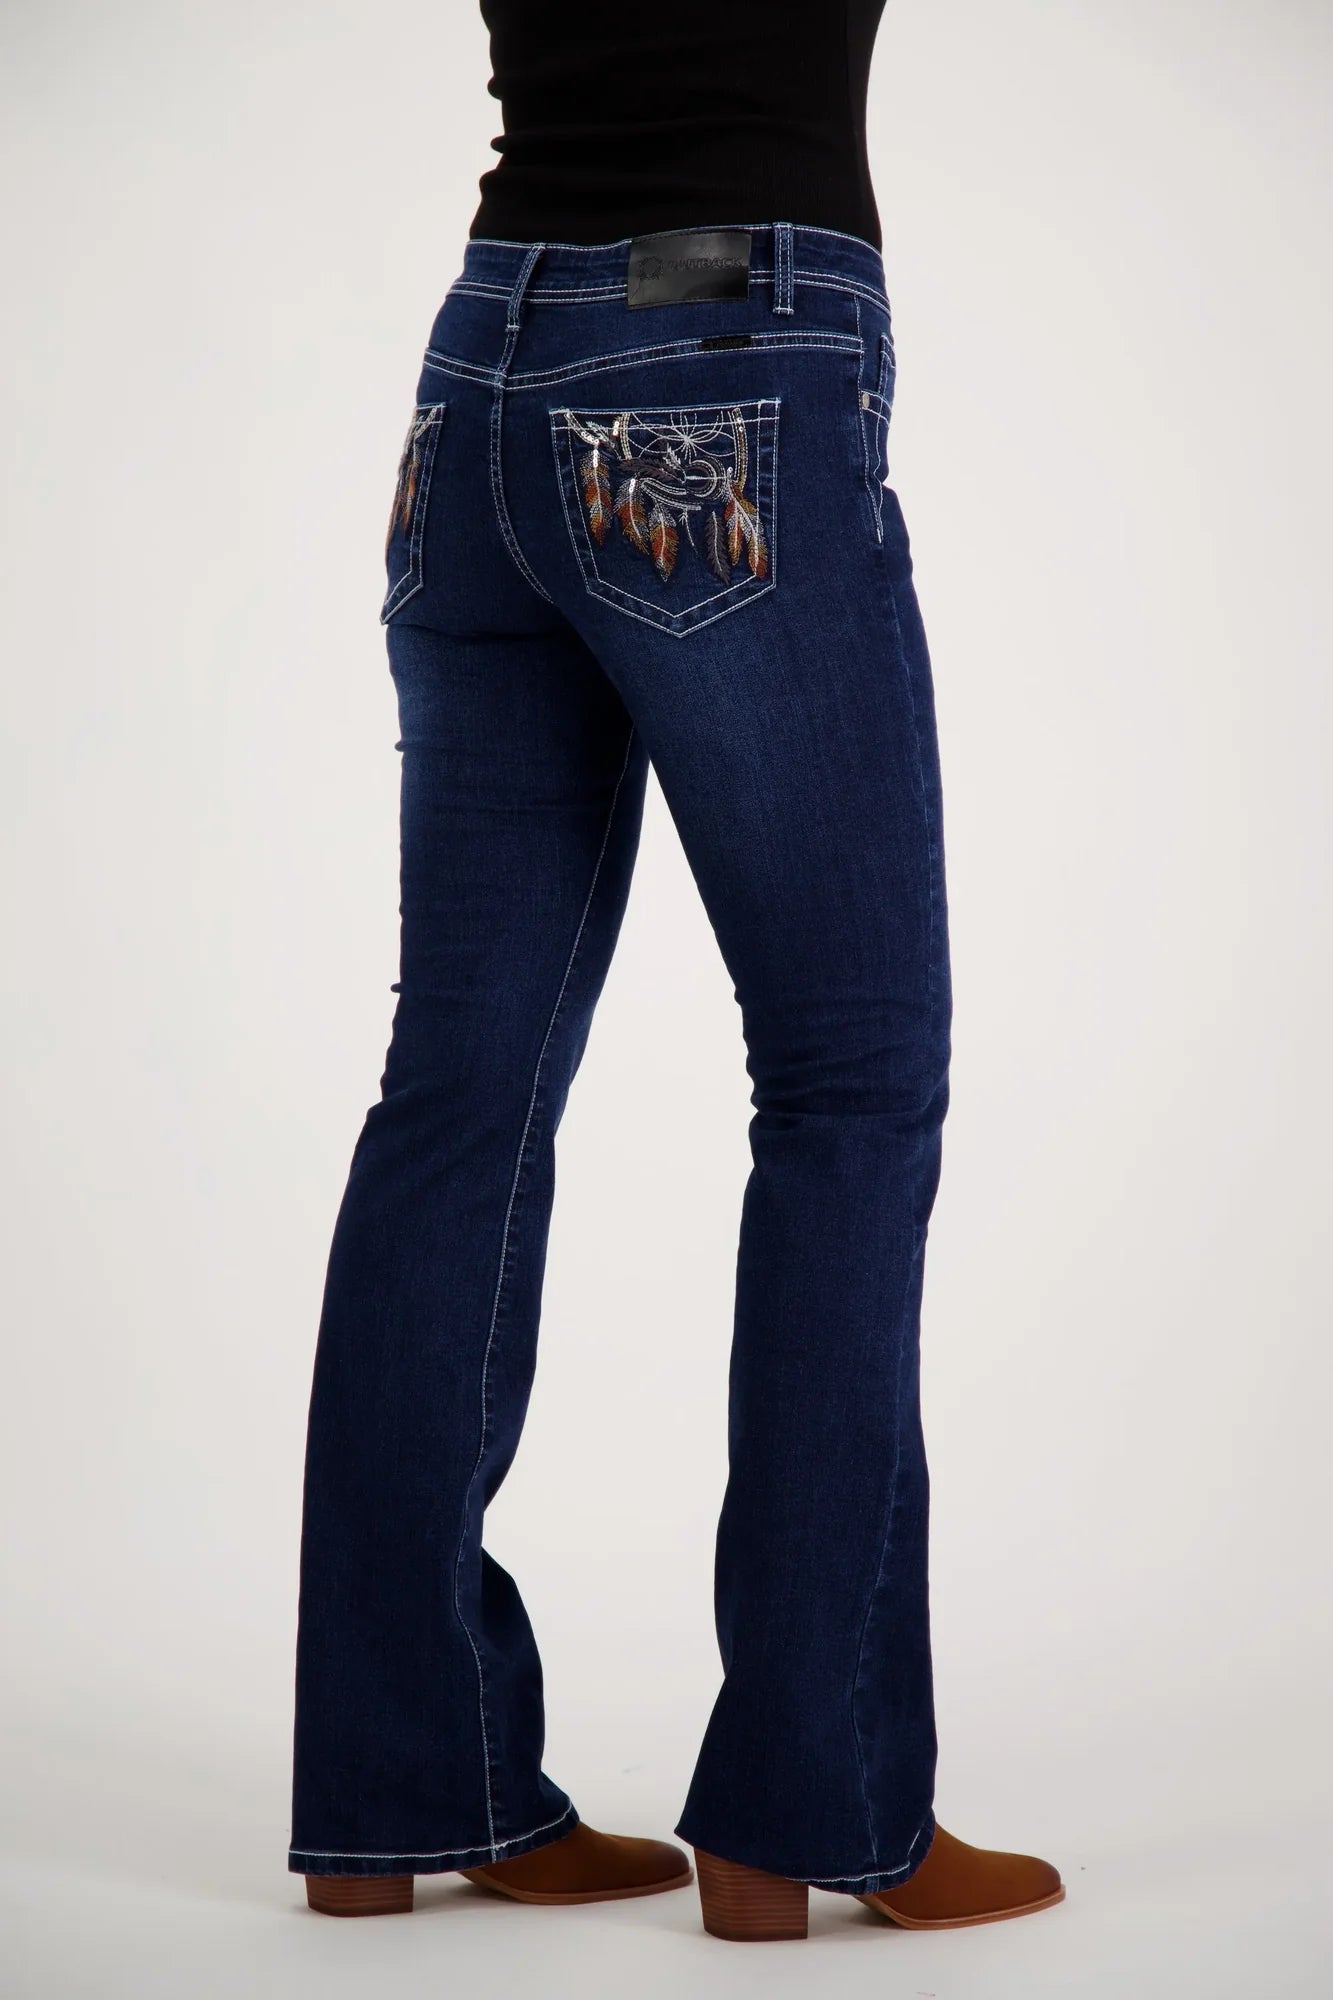 Outback Claudette Mid Rise Stretchy Jeans